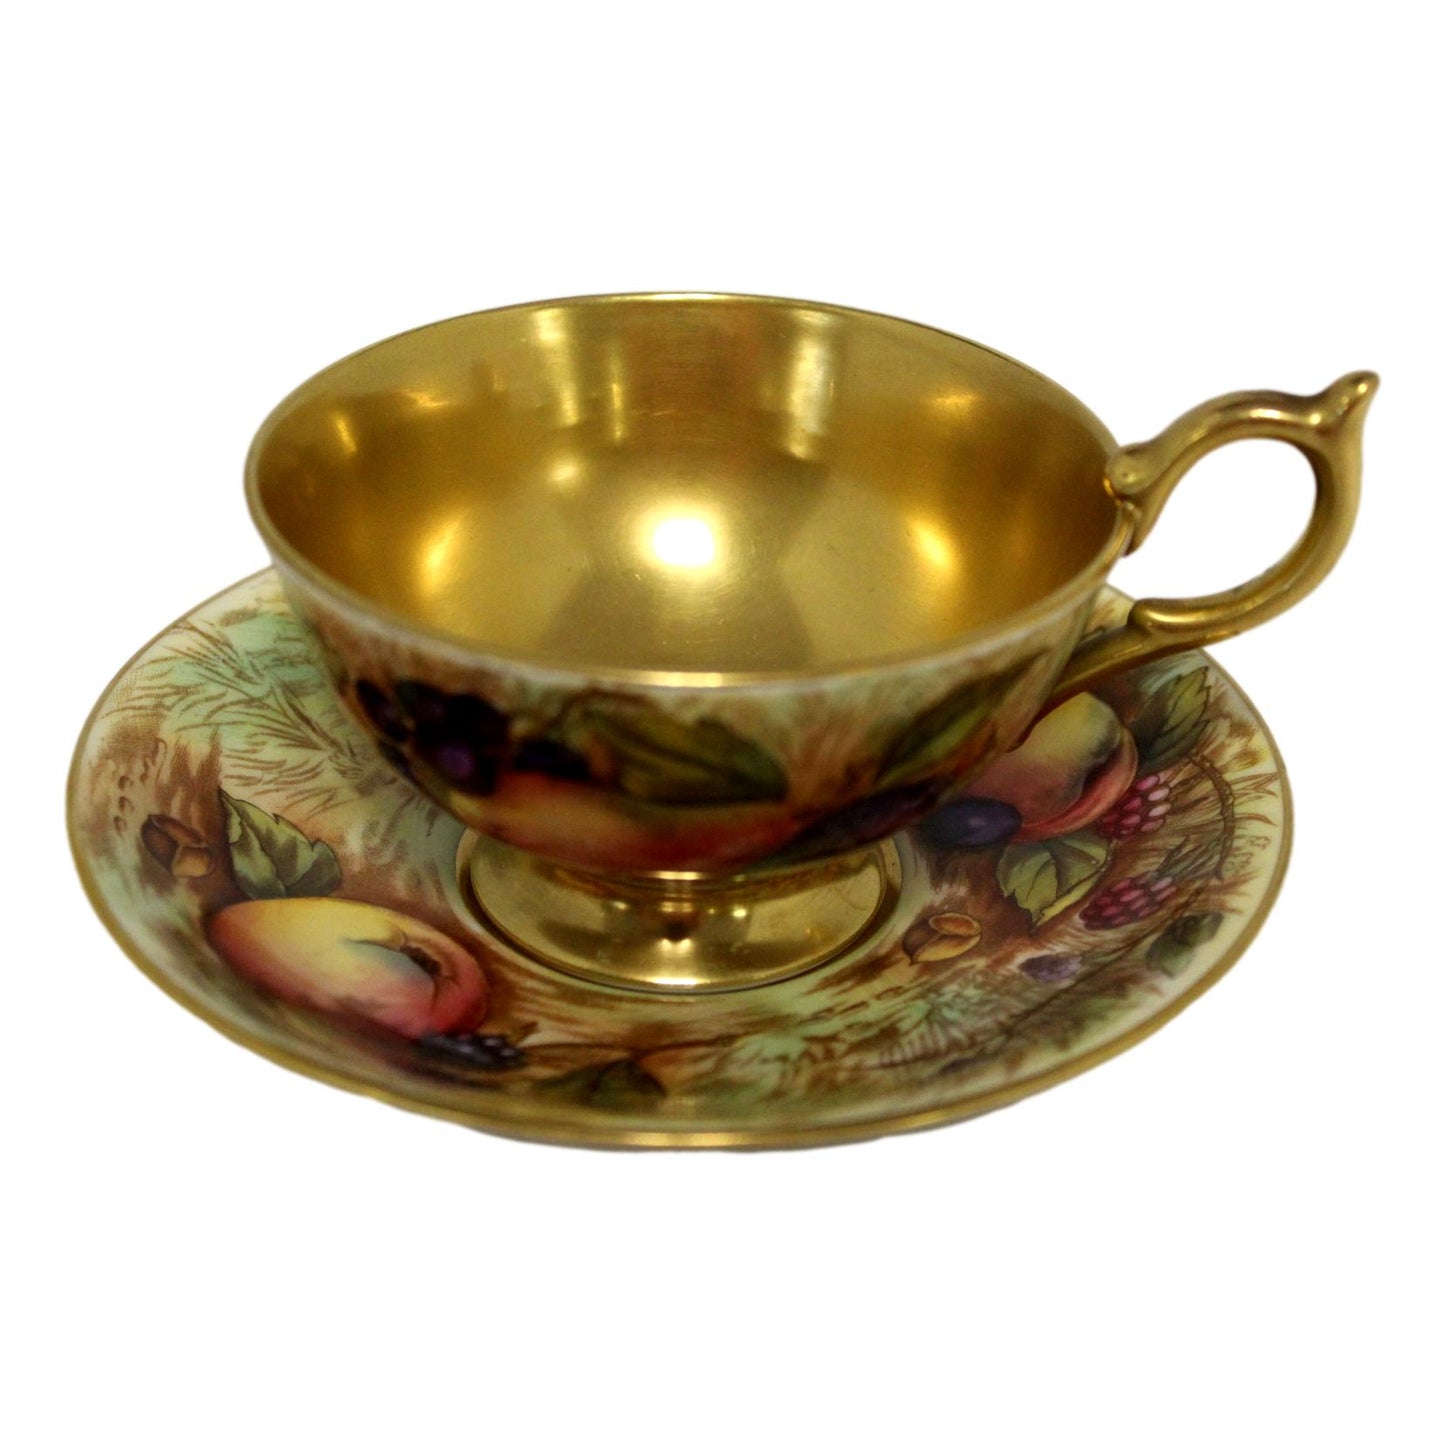 Aynsley Golden Fruit Cup and Saucer